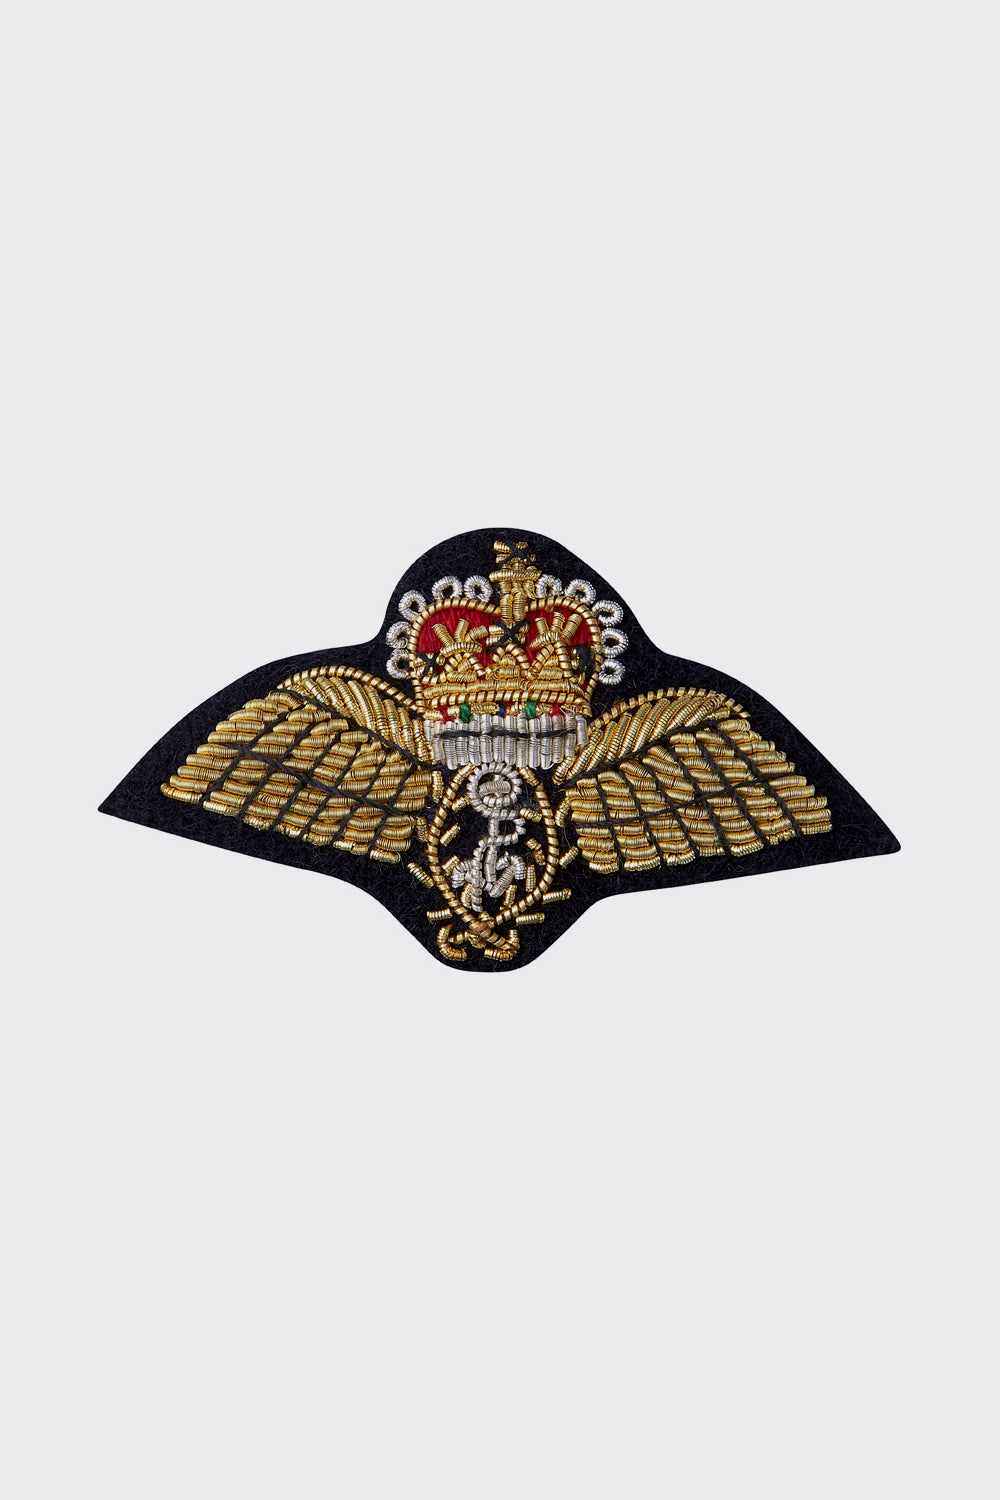 Fleet Air Arm St Edwards Crown Embroidered Badge - Small